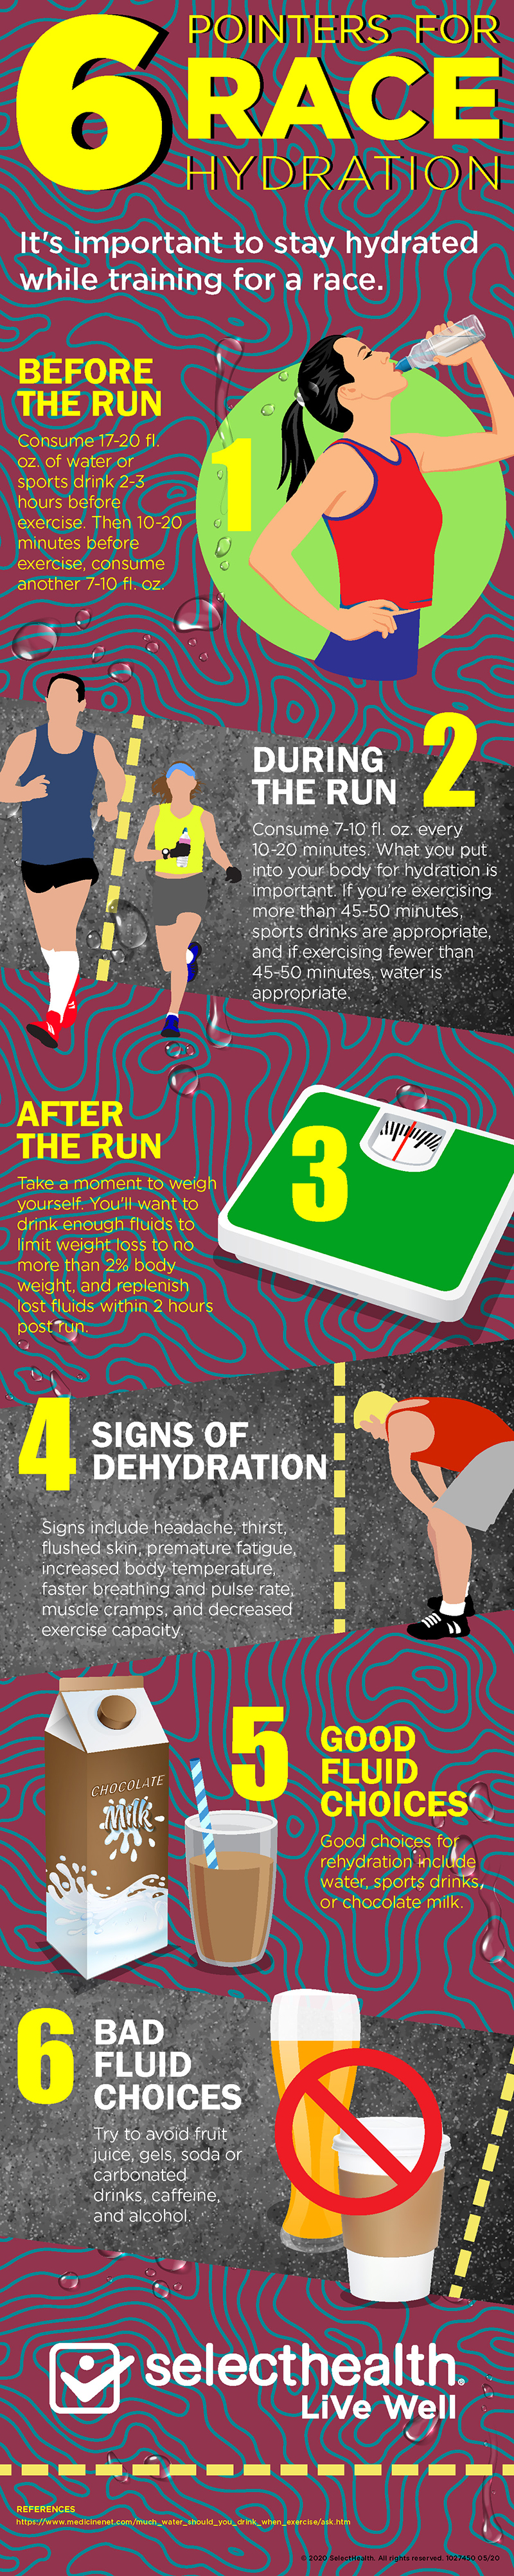 Infographic illustrating how to properly hydrate for a run or race